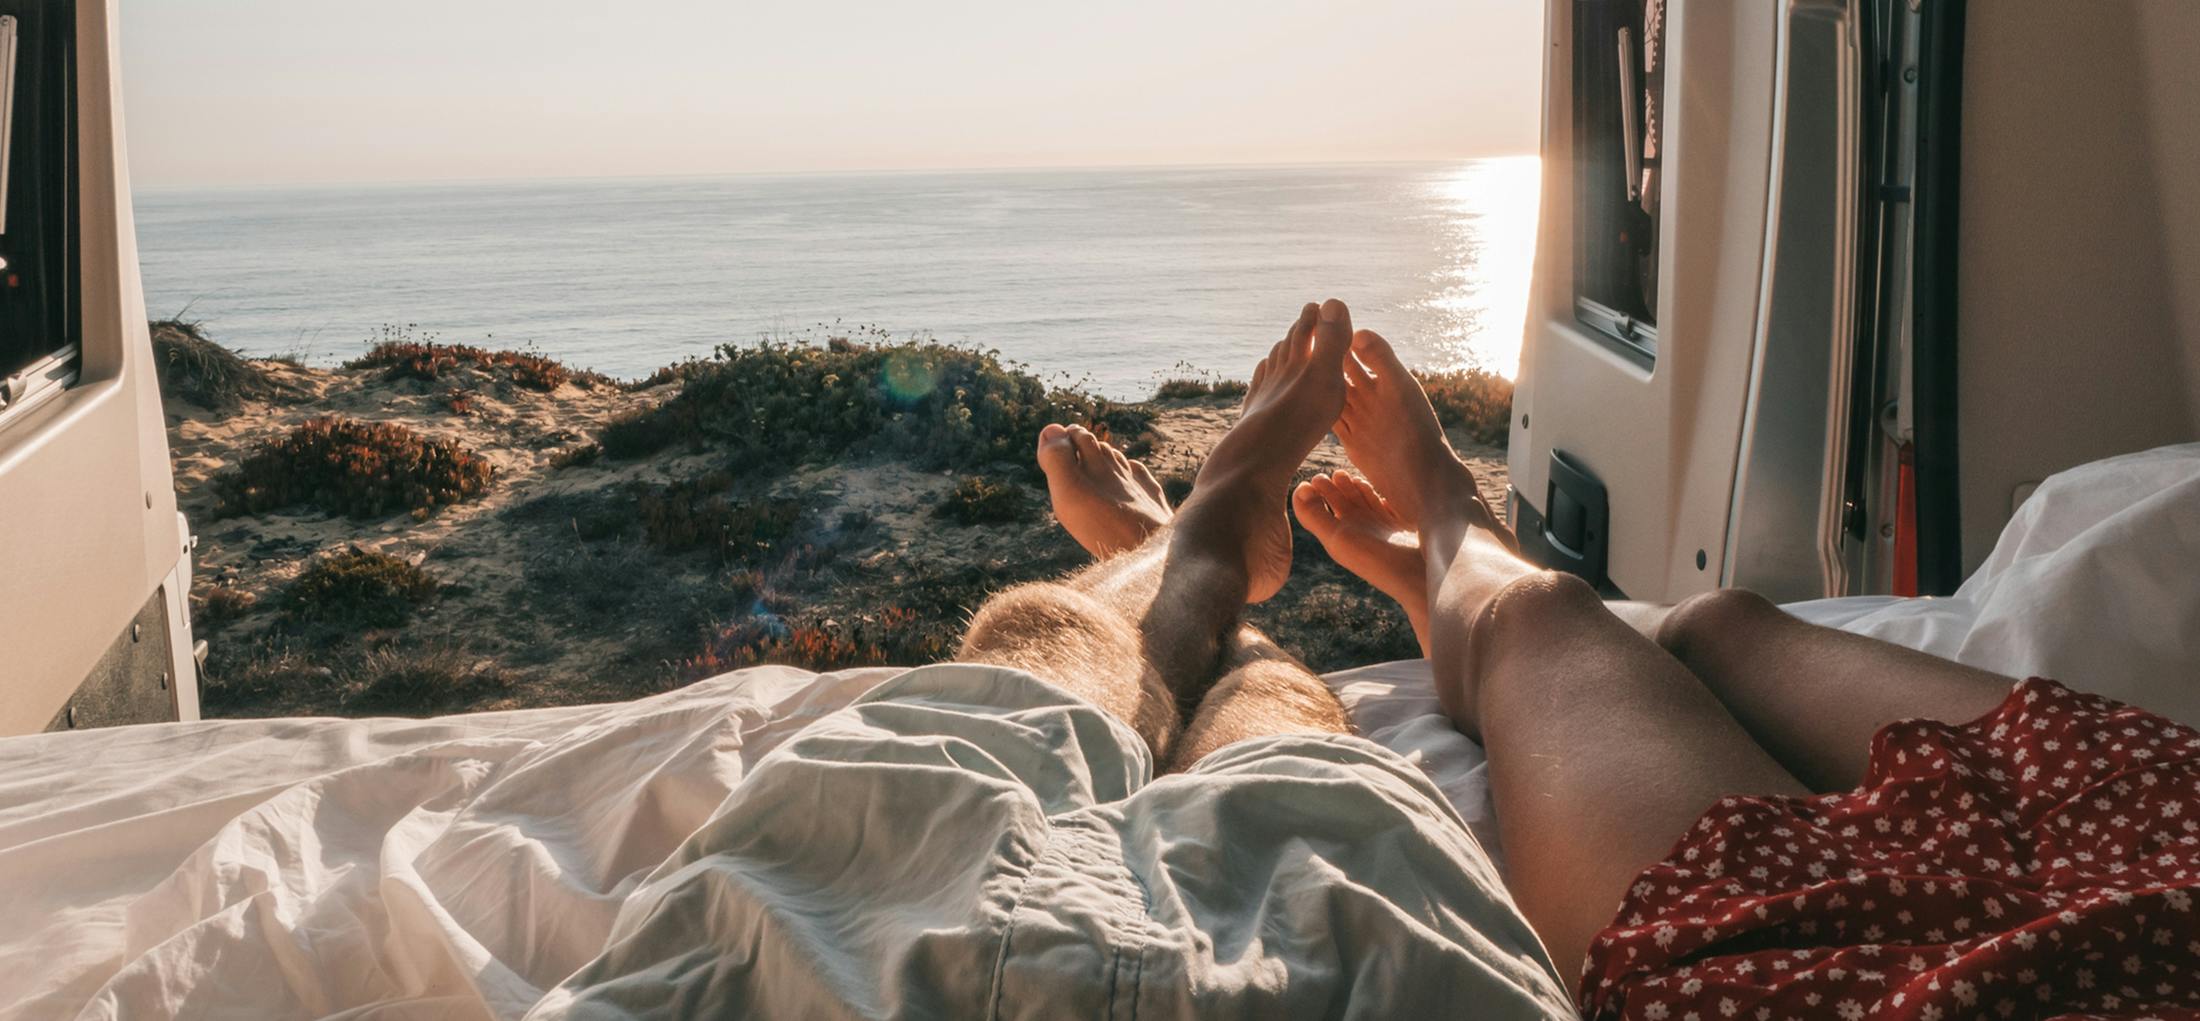 A couple with their legs hanging out of their van overlooking the ocean